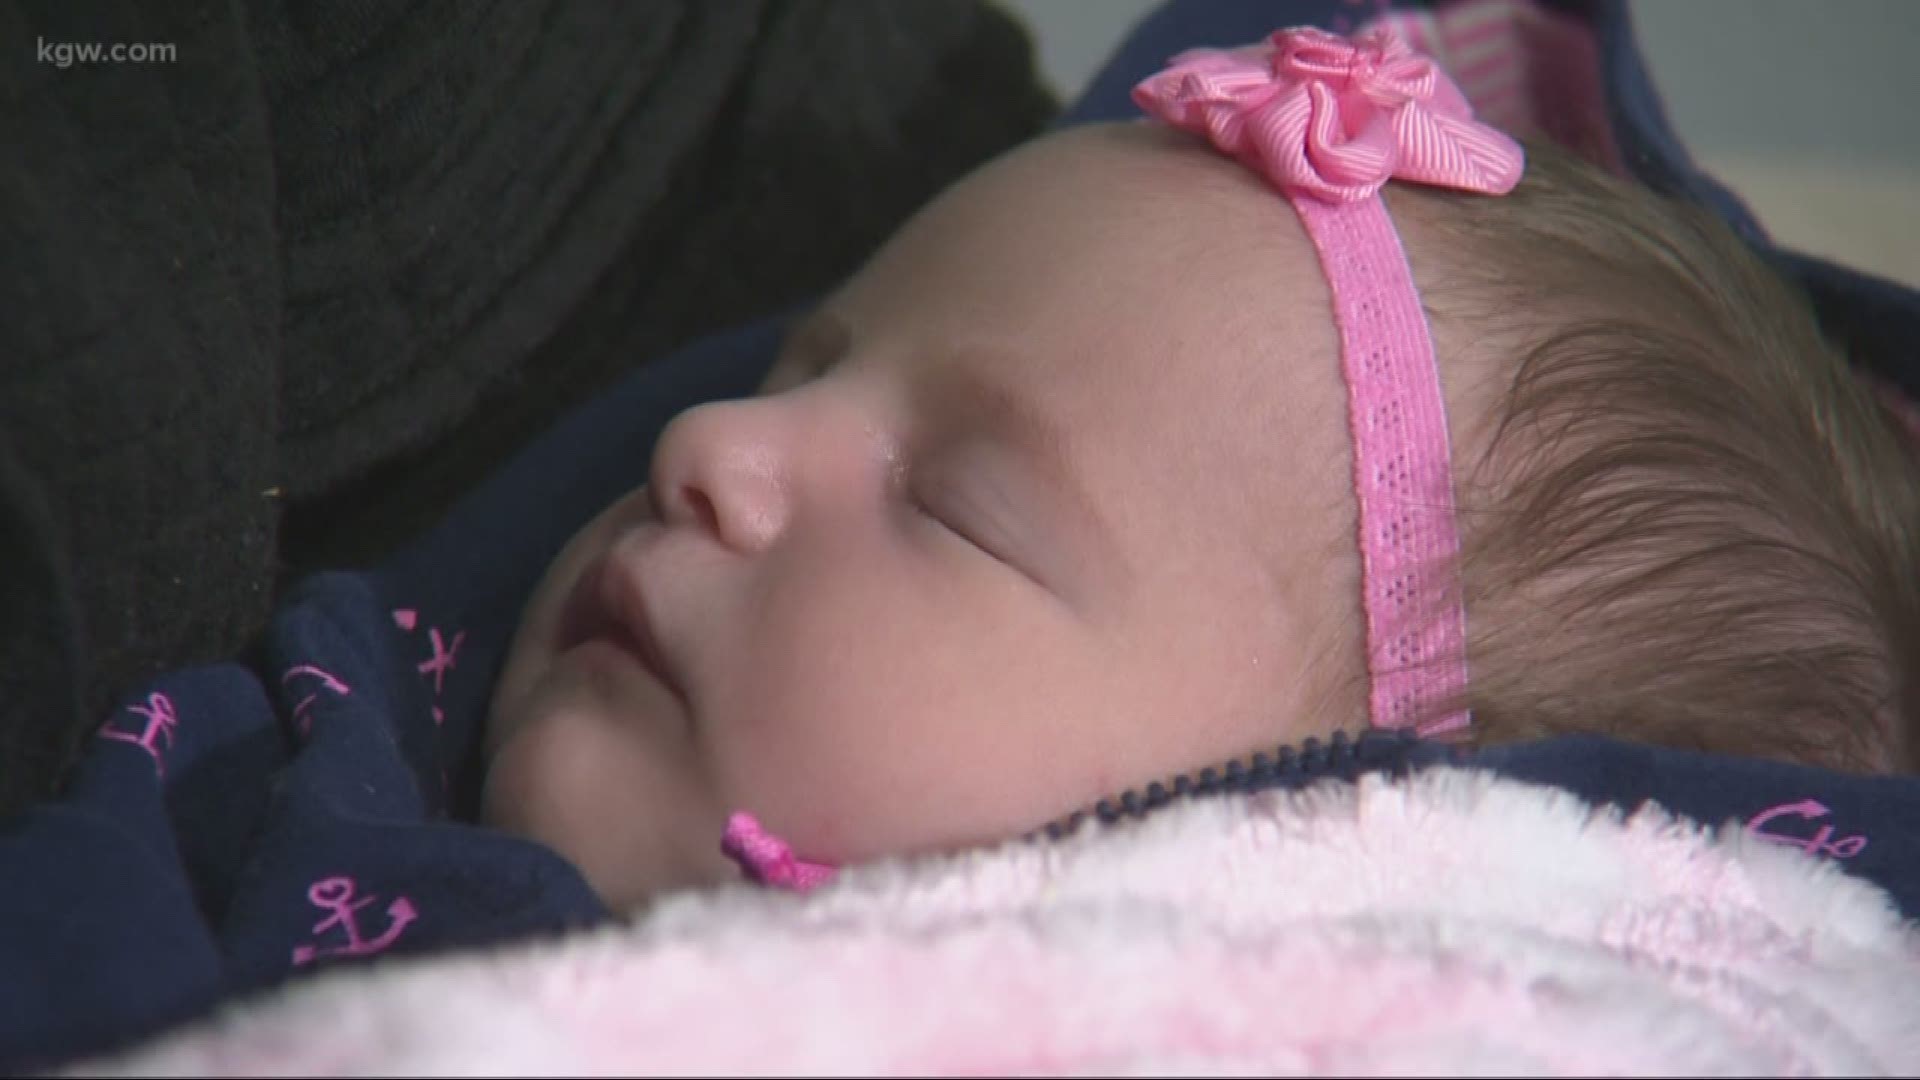 The small town of Rosburg, Washington, is celebrating the birth of a special baby girl. Baby Ameilia arrived unannounced and surprised the whole town.